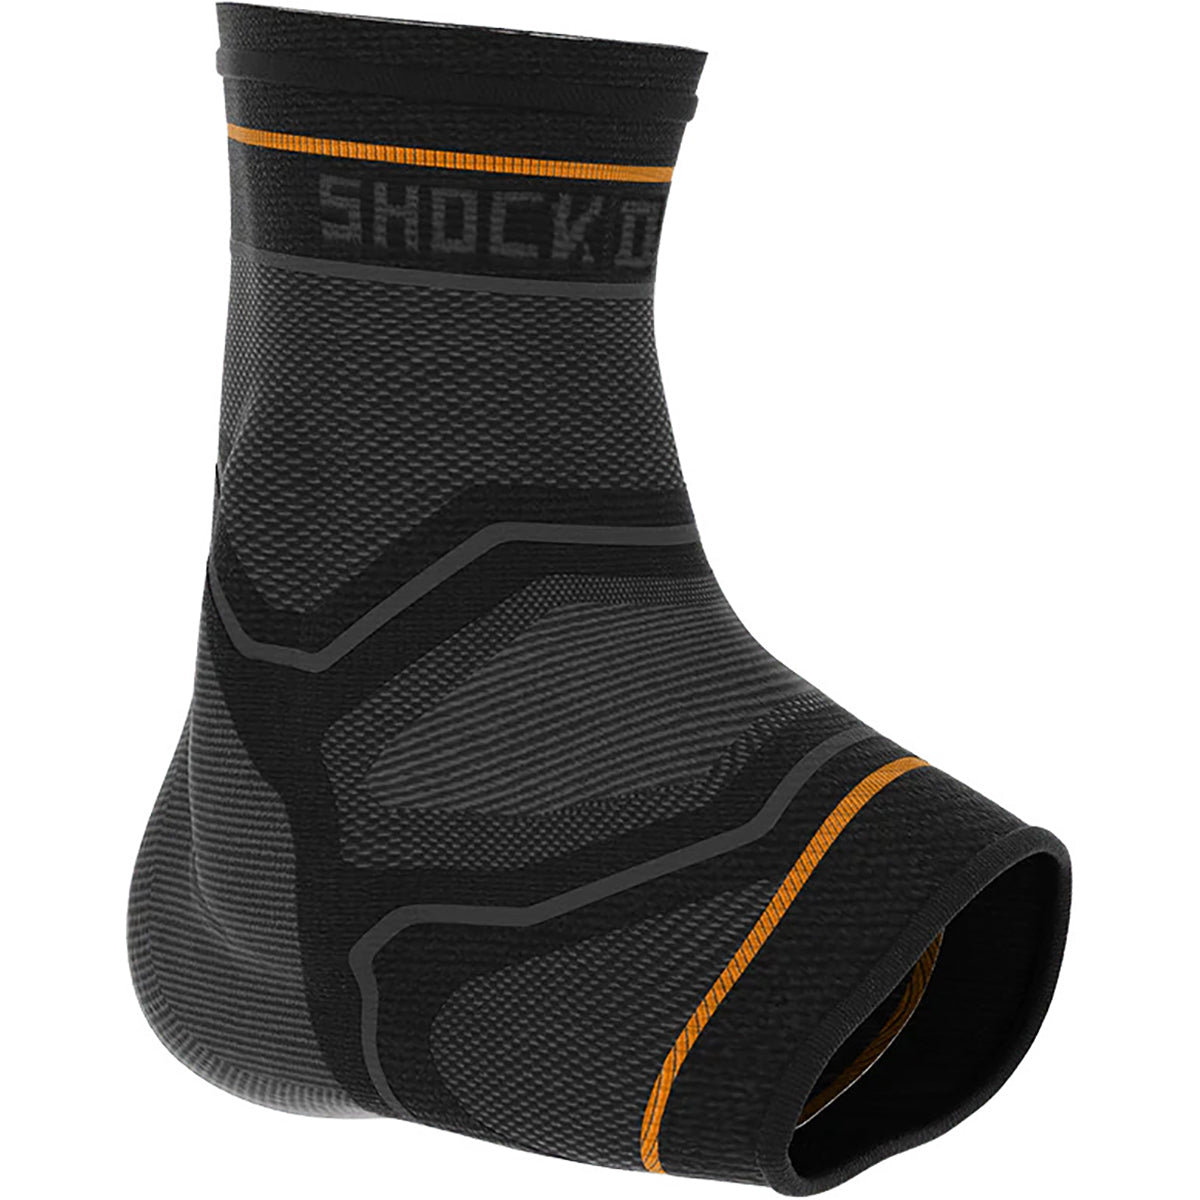 Shock Doctor Compression Knit Ankle Sleeve with Gel Support - Black/Gray Shock Doctor